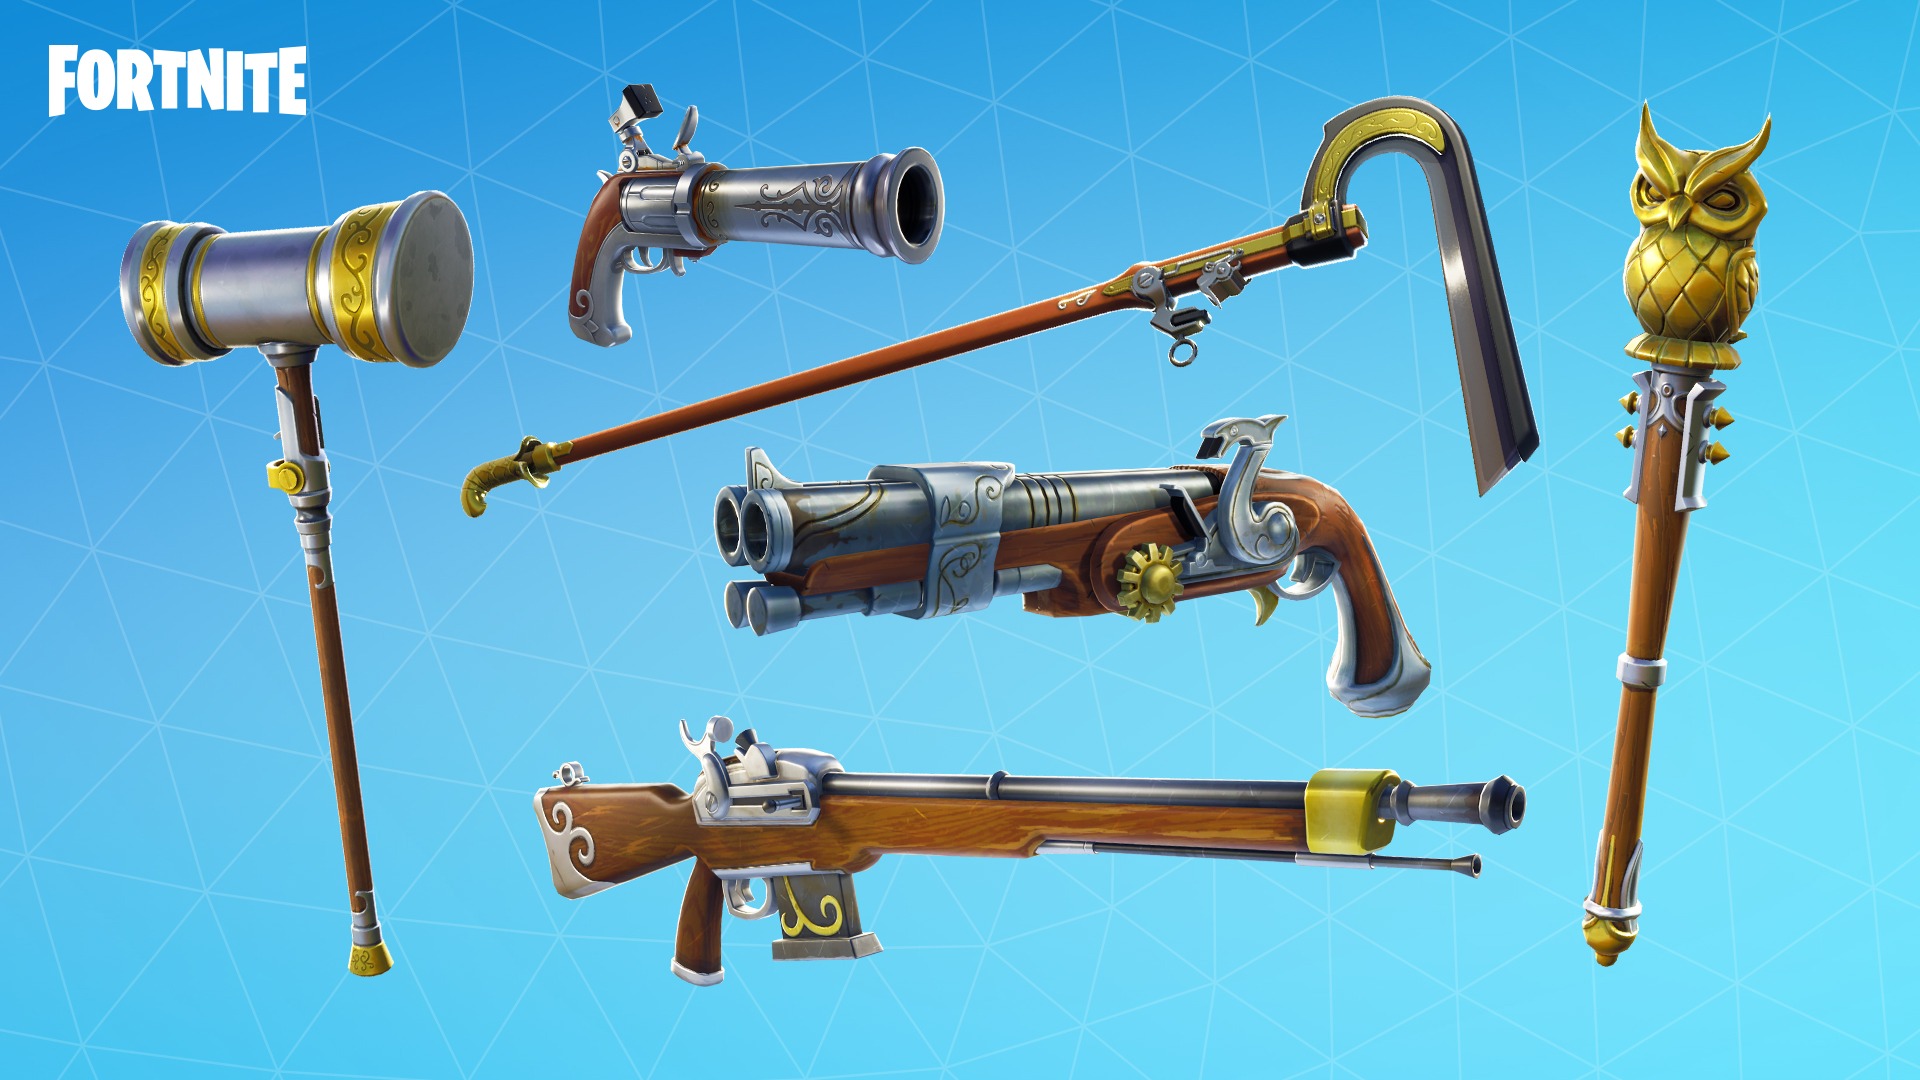 We are here to explain what is a melee weapon Fortnite, what guns are melee weapons, becuase you need to know that to complete a quest.